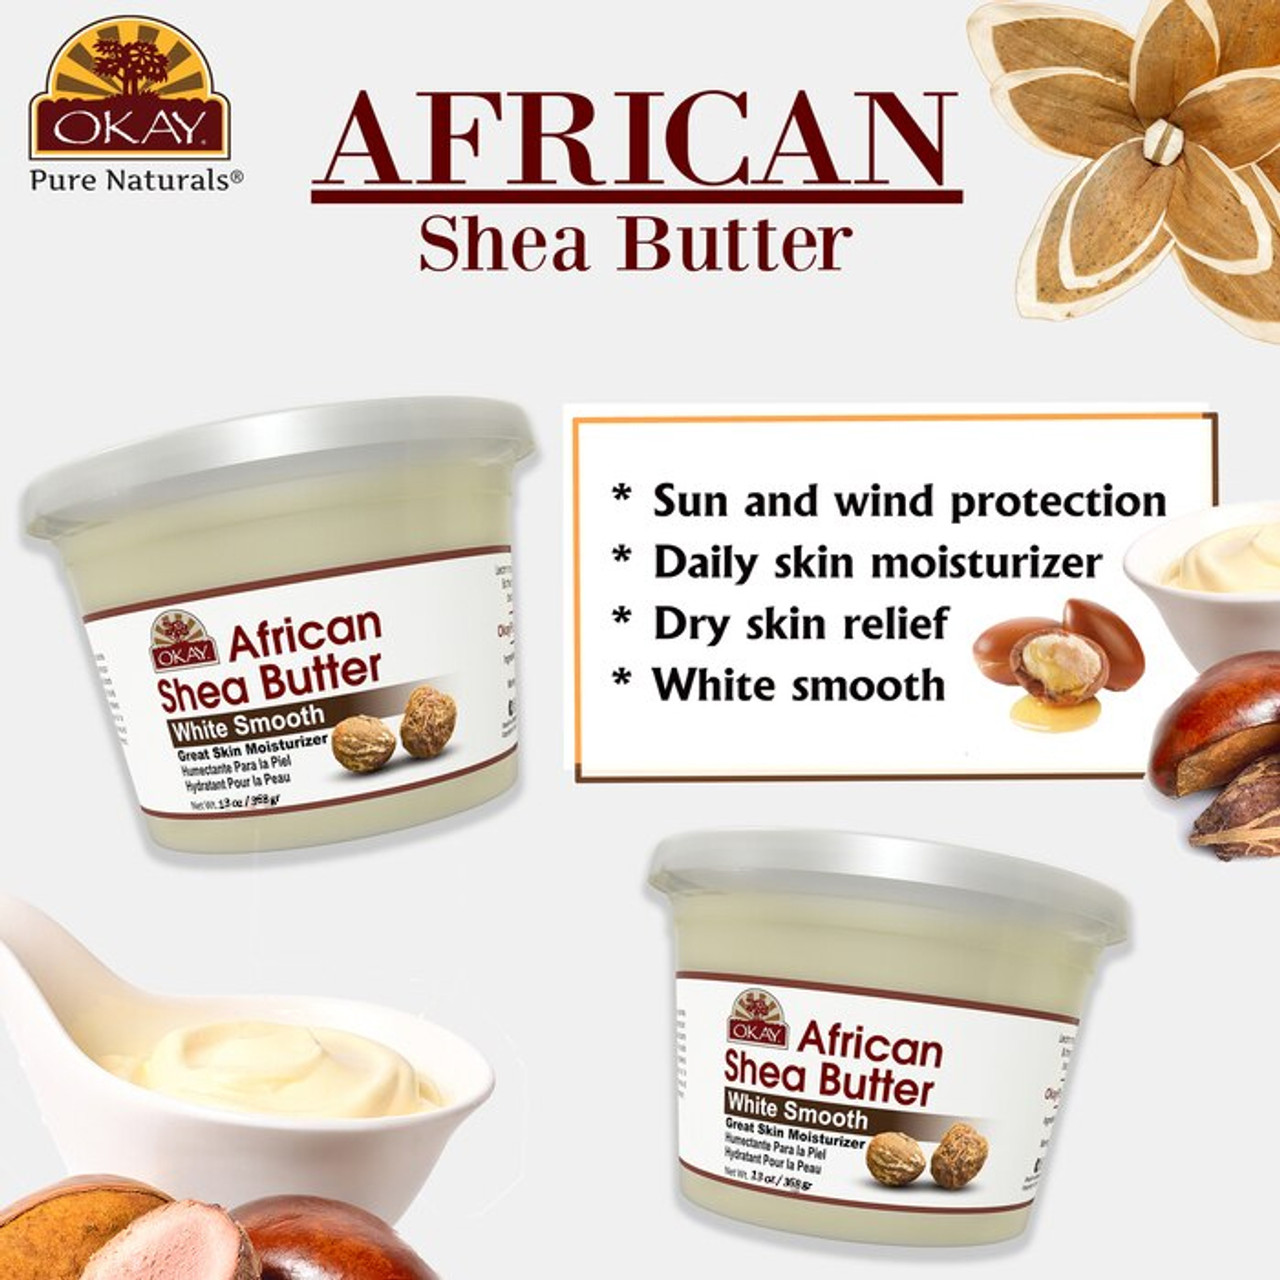 OKAY African Shea Butter, Yellow Smooth, 16 oz.